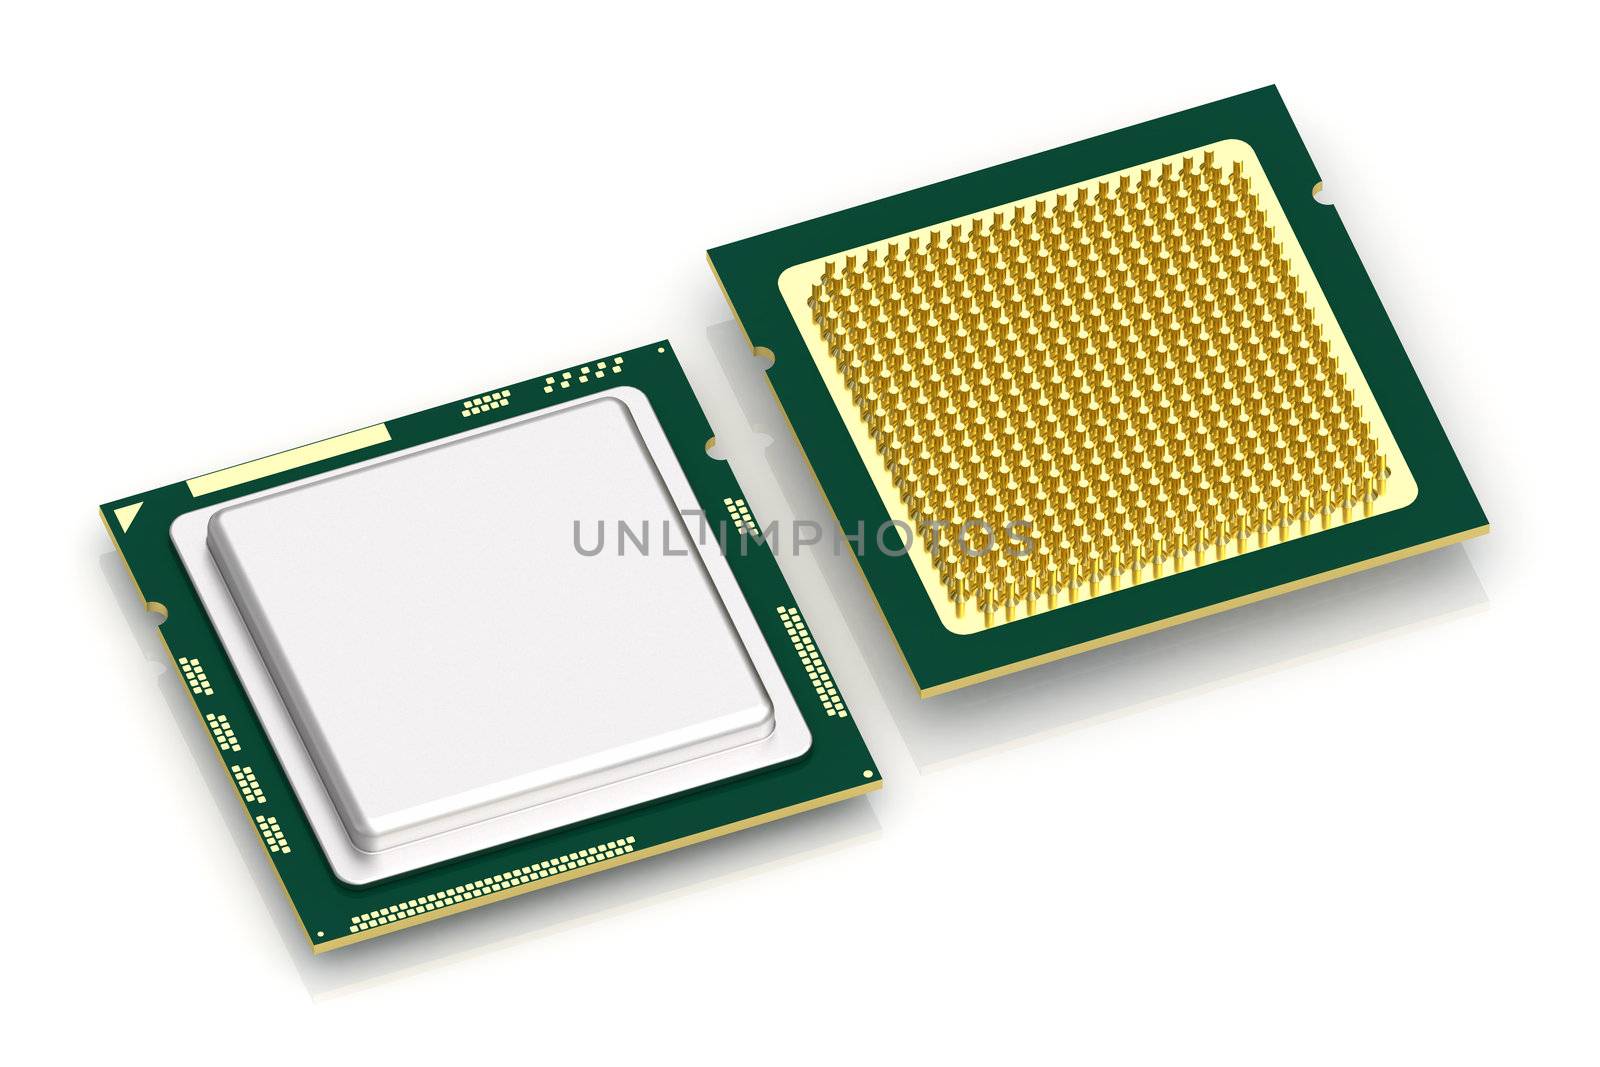 Top and bottom view of CPU processor on white background. High resolution 3D image